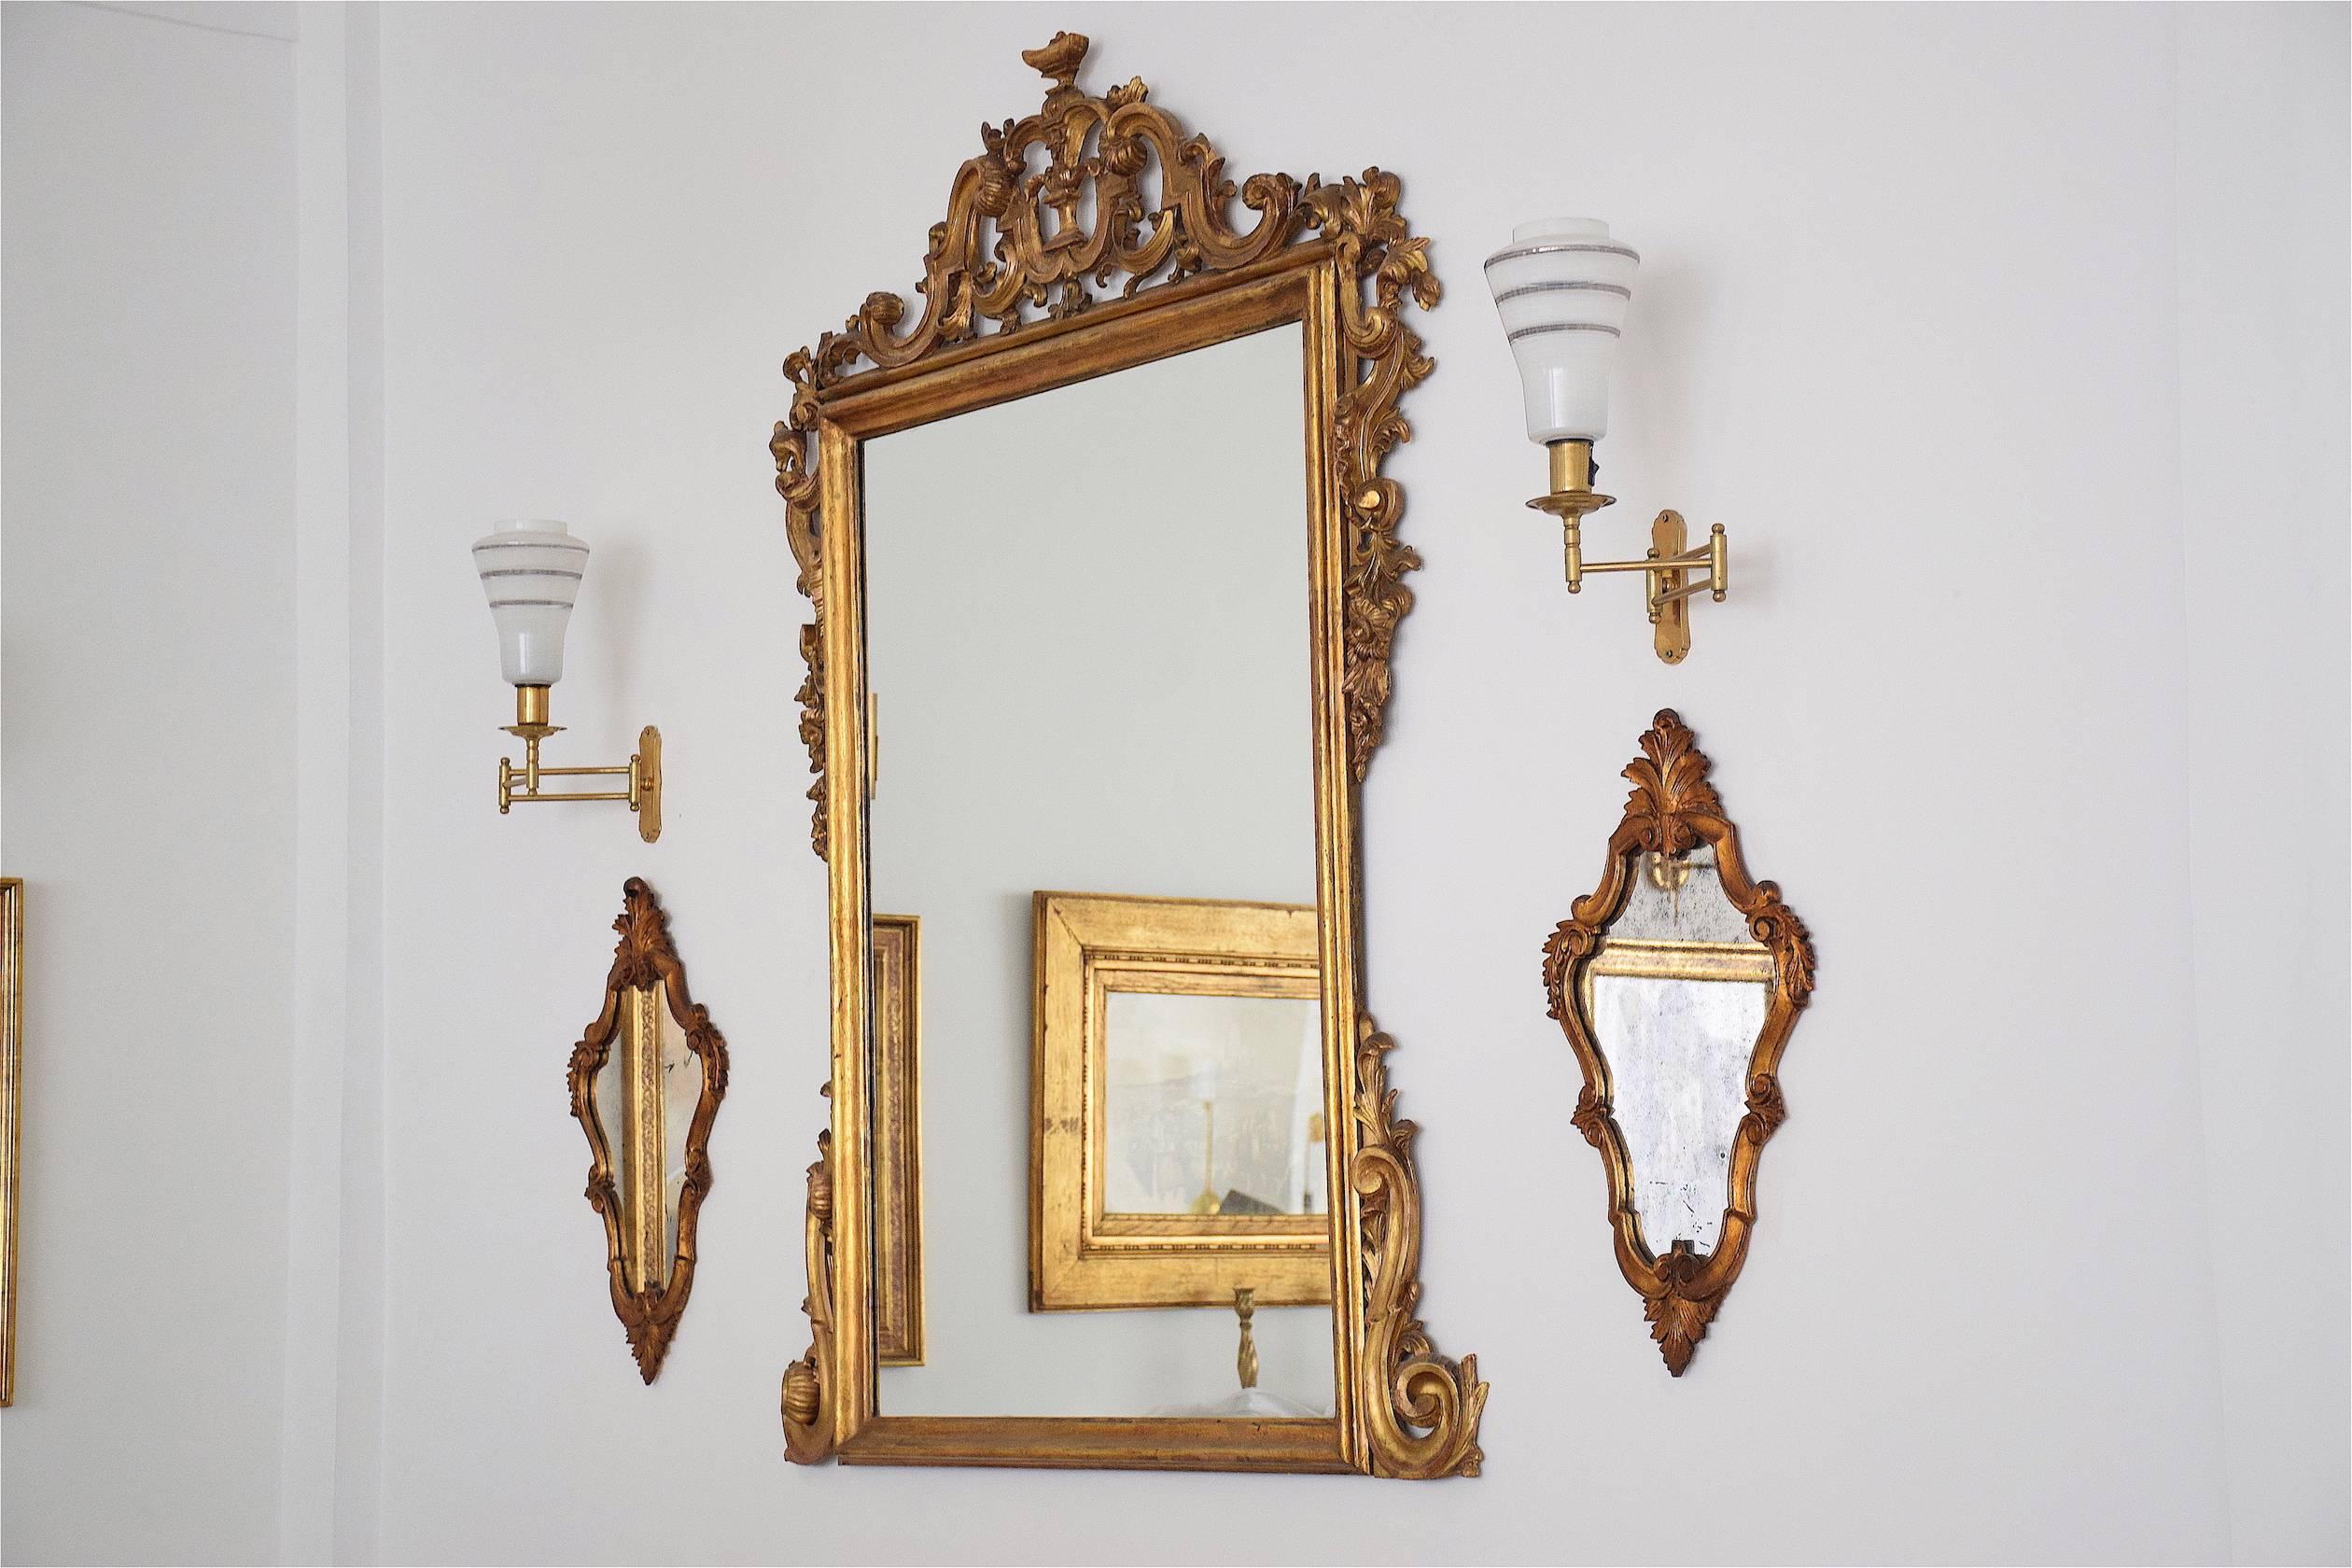 Pair of Italian Rococo style wall mirrors composed of giltwood with delicate leaf motifs and available in their original glass.
Italy. Beginning of the 1900's. 
-----
All our pieces are fully restored at our atelier and we only offer items that will